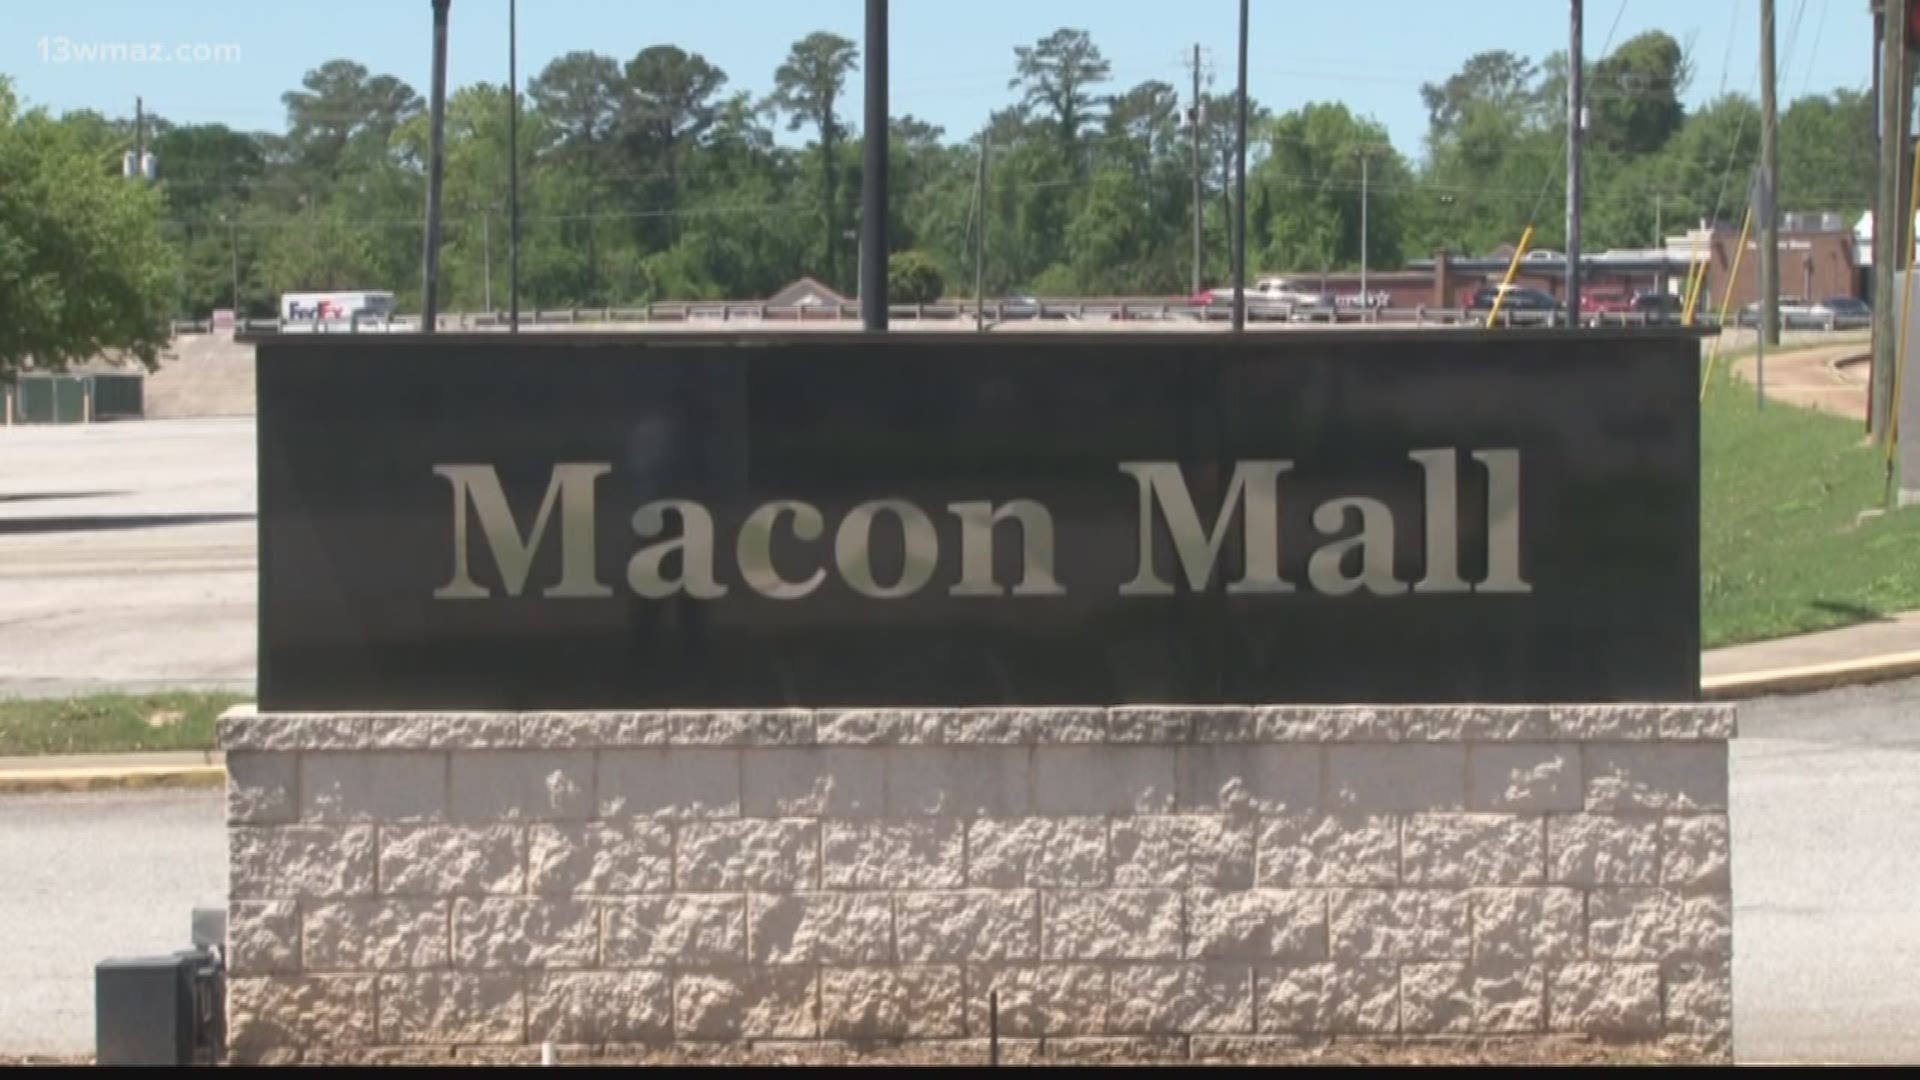 People on social media are talking about the future of the Macon Mall, some of them passing along a rumor that it has a new owner, Mercer University. Is it true?